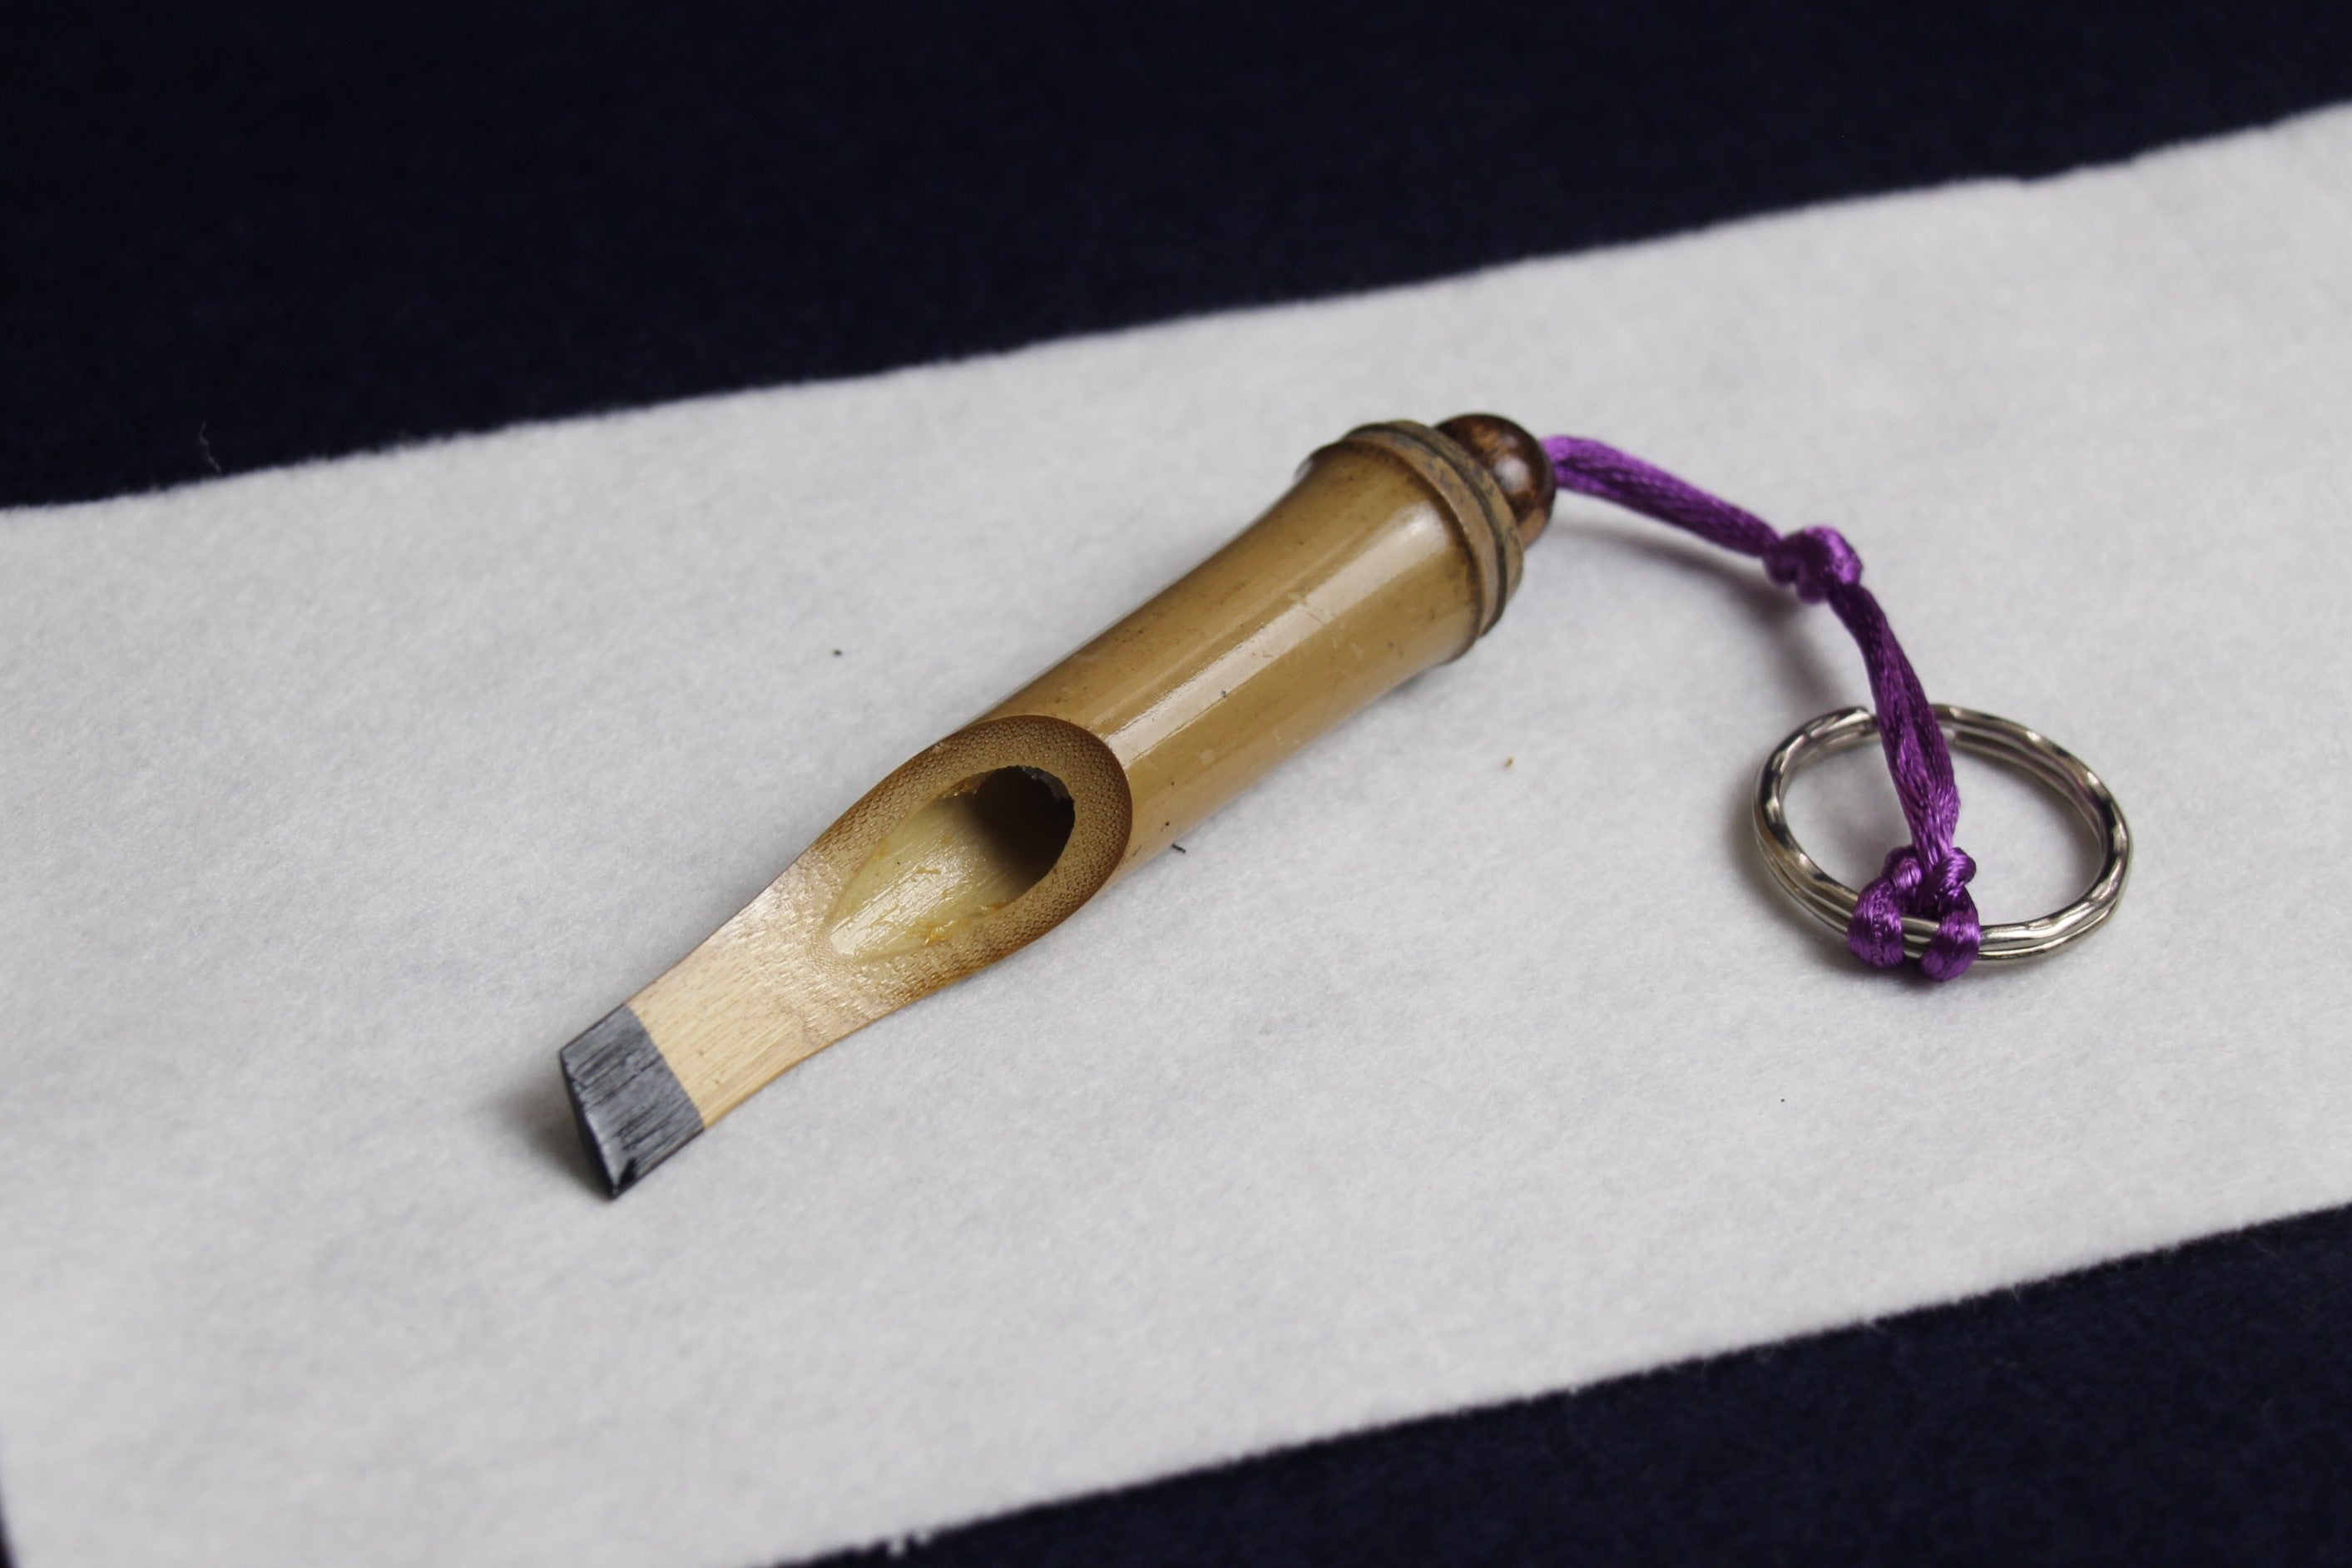 Bamboo keyring in shape of Arabic calligraphy qalam pen